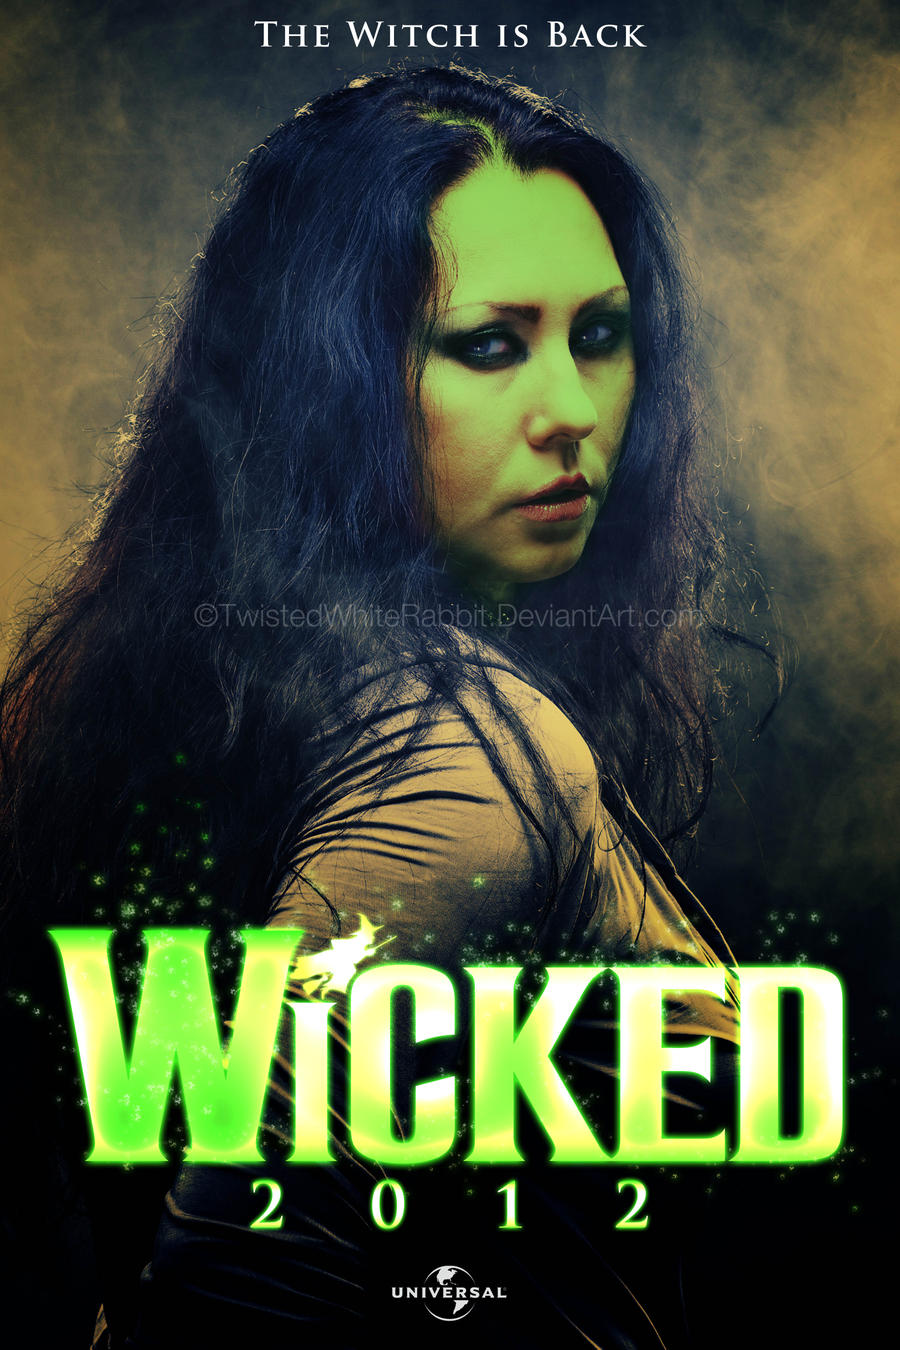 The Wicked movie